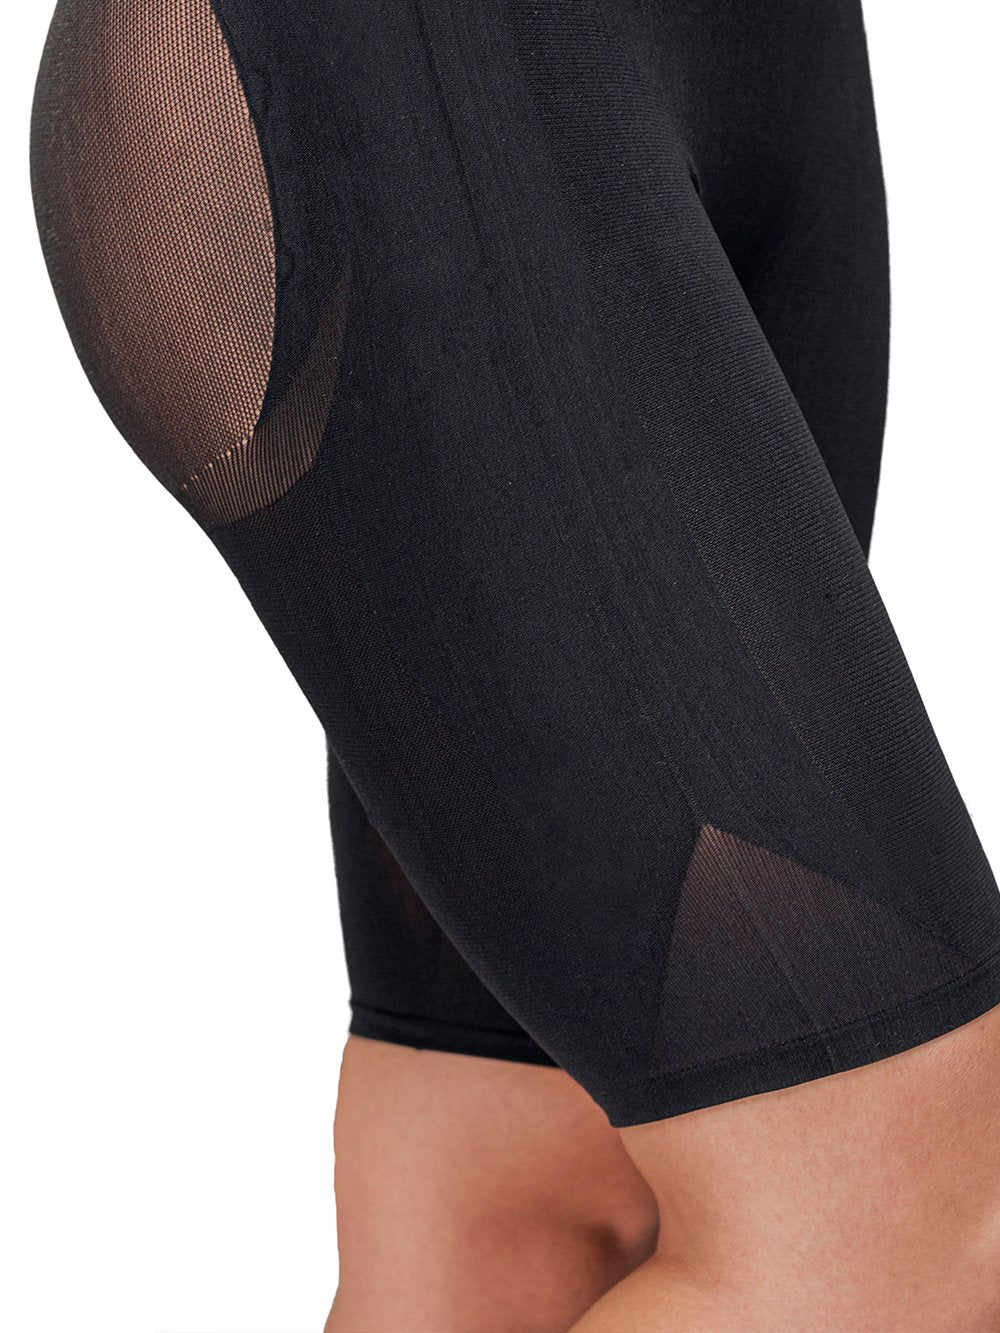 Leonisa Shapewear Invisible Extra High-Waisted Butt Lifter Shaper Short